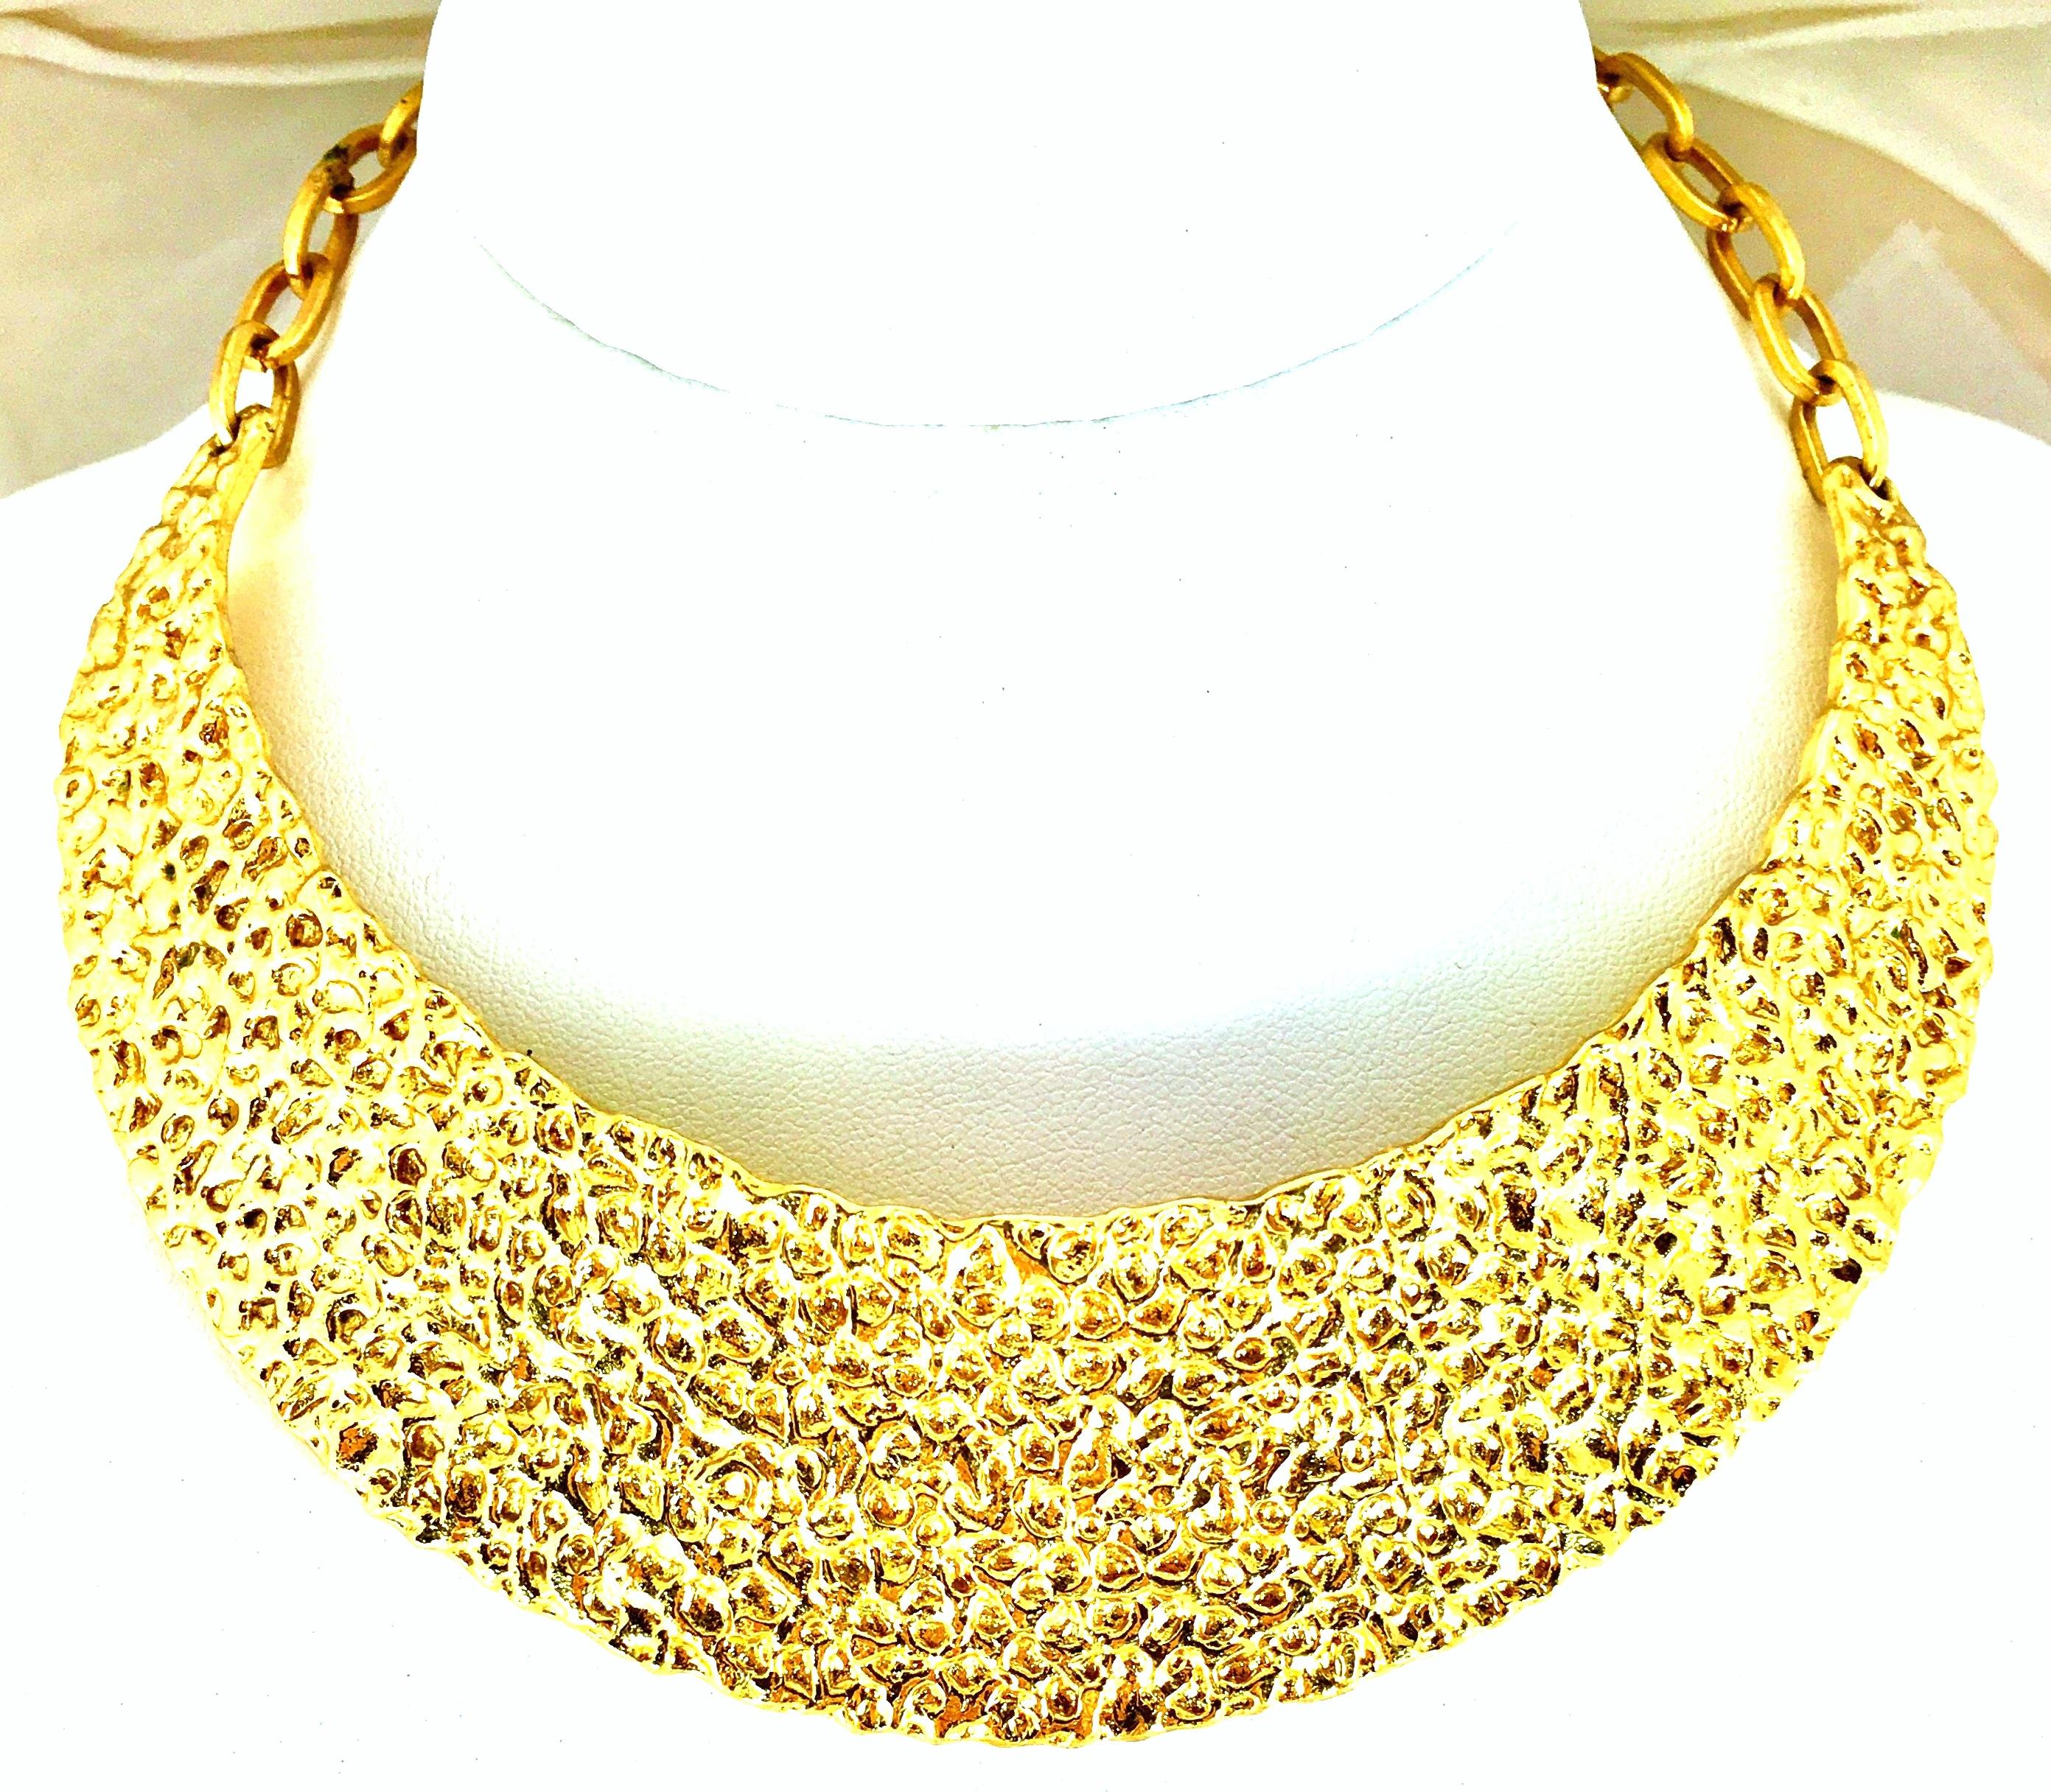 20th Century Rare Modernist Gold Plate Hammered Collar Choker Style Necklace By, Trifari. Features a gold hammered curved collar plate with a chain link adjustable clasp. Signed on the hook clasp, Trifari.
Hammered collar plate measures, 5.75